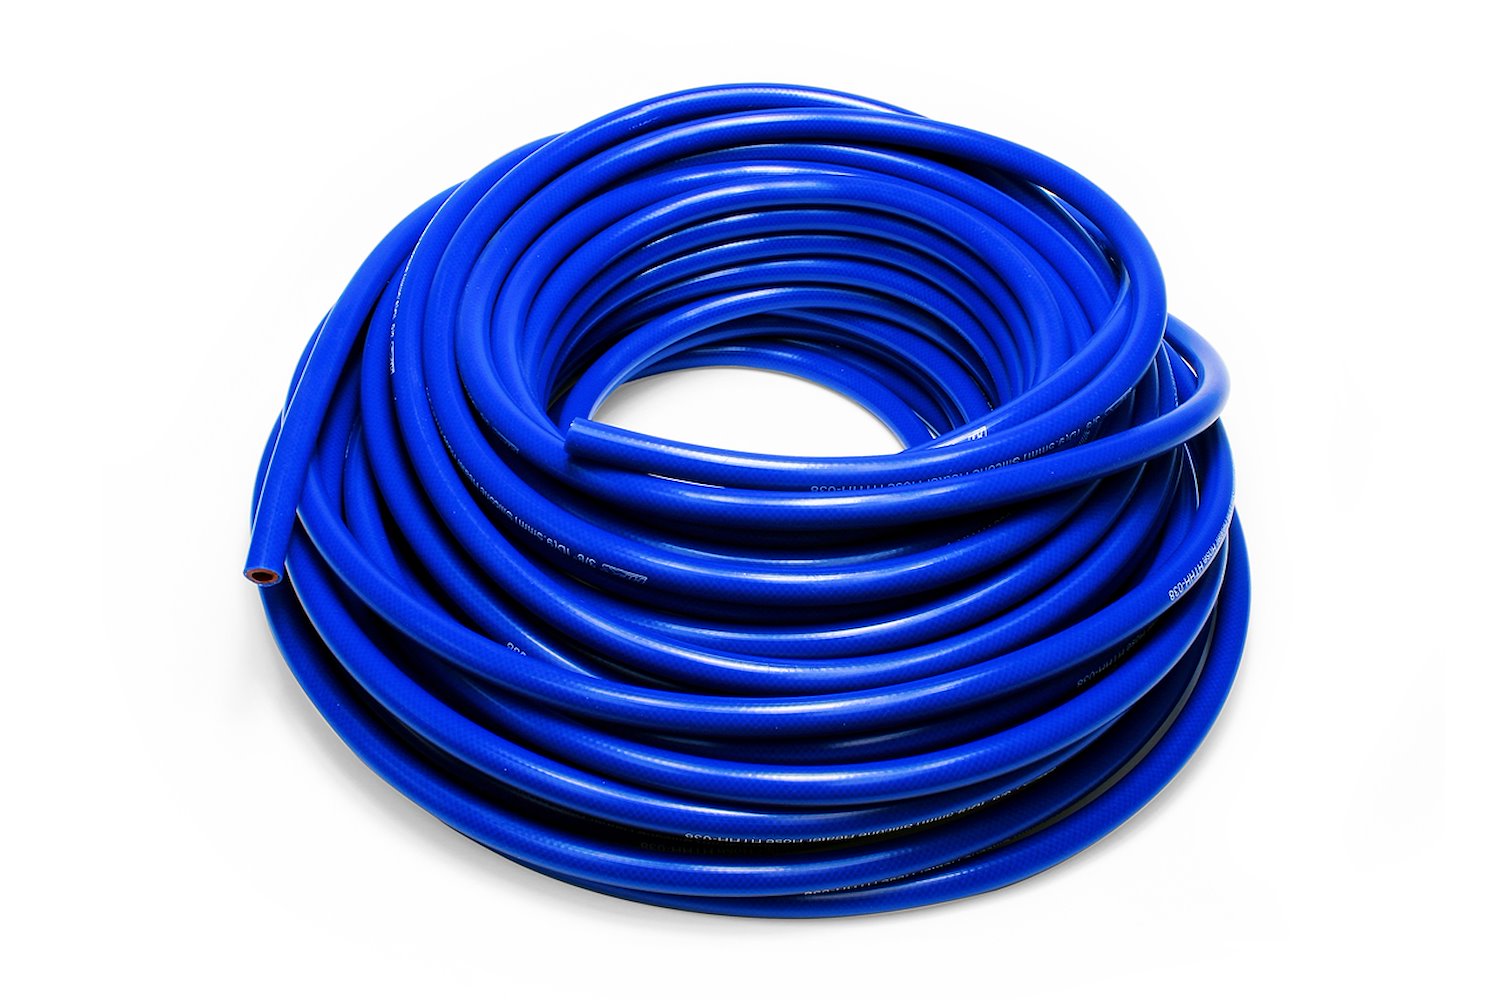 HTHH-032-BLUEx100 Silicone Heater Hose Tubing, High-Temp Reinforced, 5/16 in. ID, 100 ft. Roll, Blue